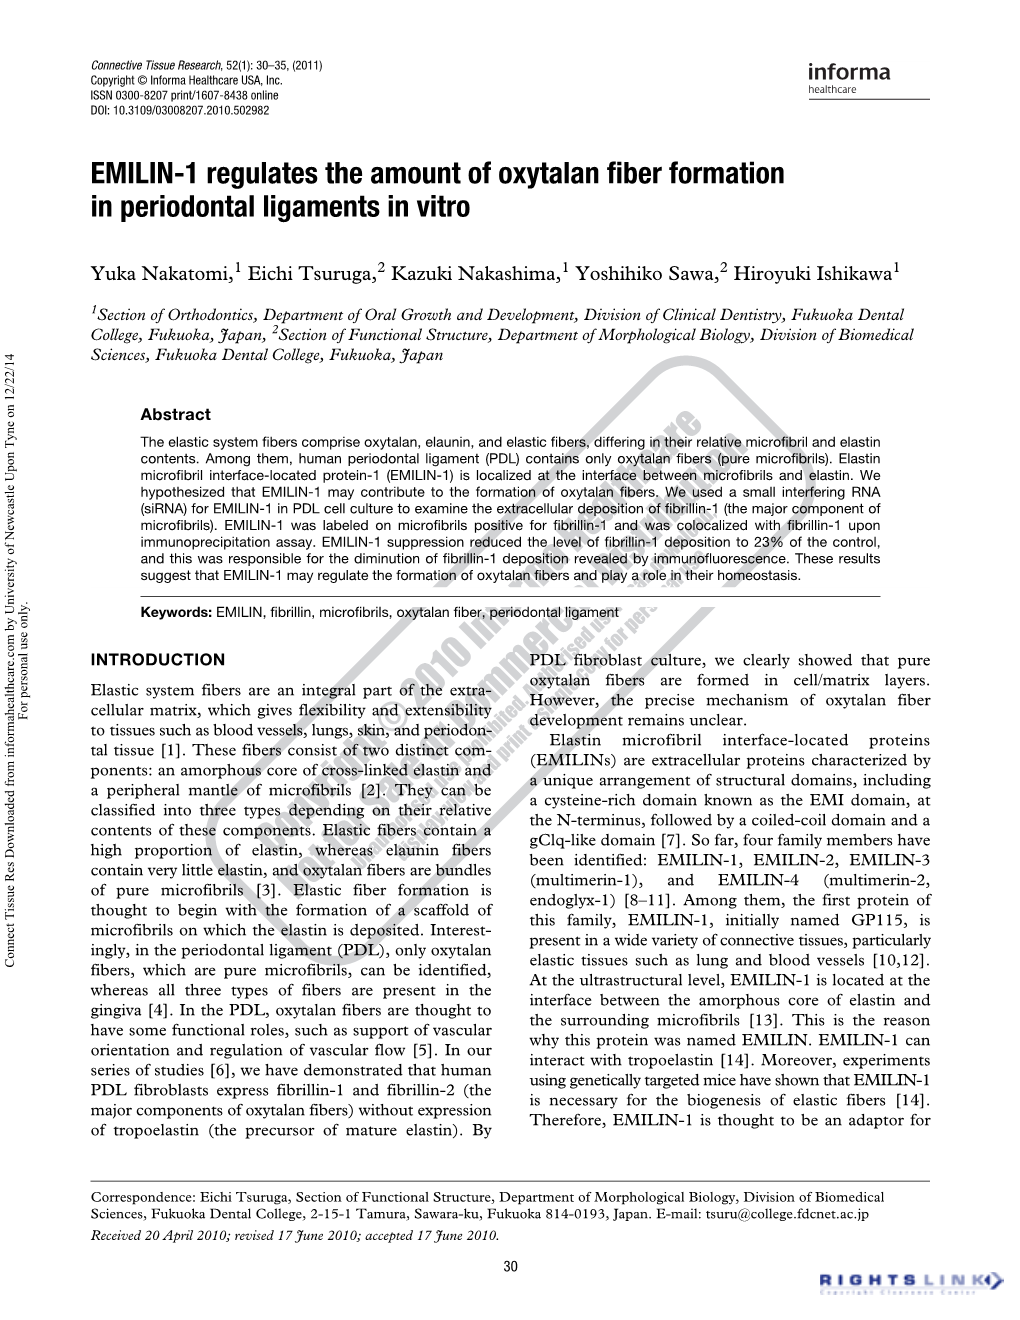 EMILIN-1 Regulates the Amount of Oxytalan Fiber Formation In